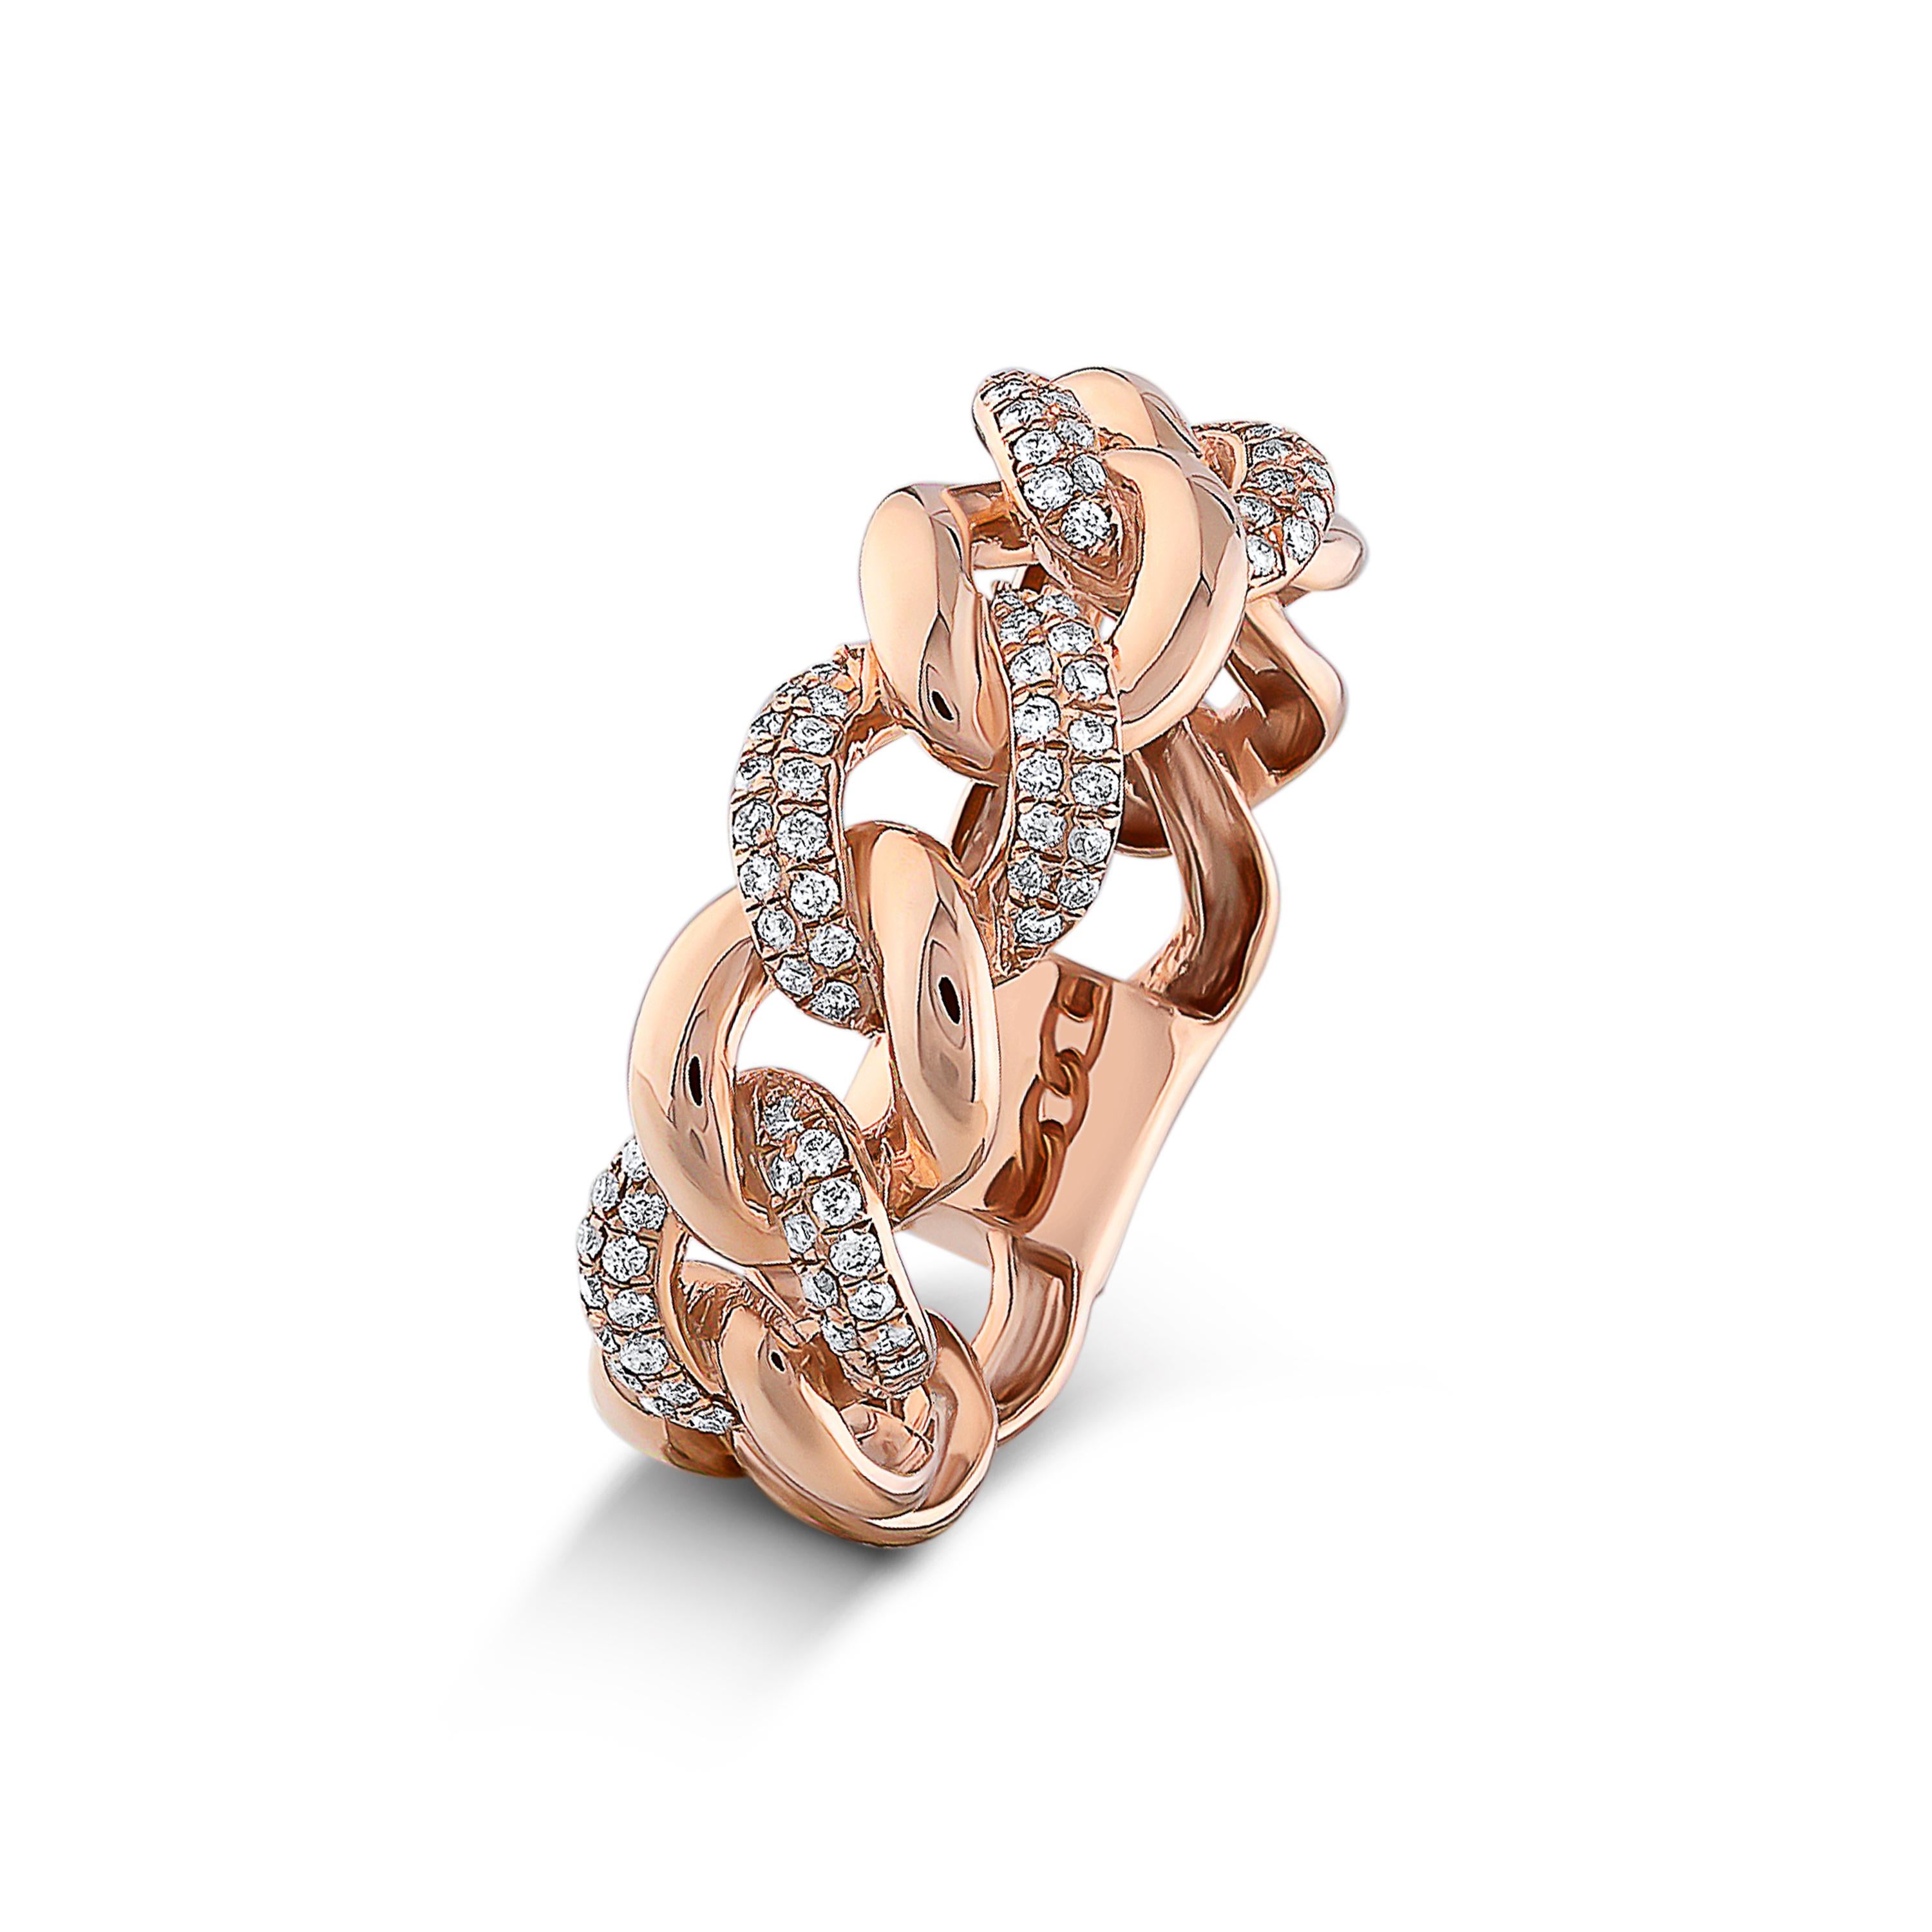 A fine and impressive 0,30-carat round diamond Cuban ring set in 18K Rose Gold.
The rose gold ring weighs 7,21 Grams.
The diamond color is F/G, and the quality is VS.
The diamond ring is made to order, which means after receiving the order, we will